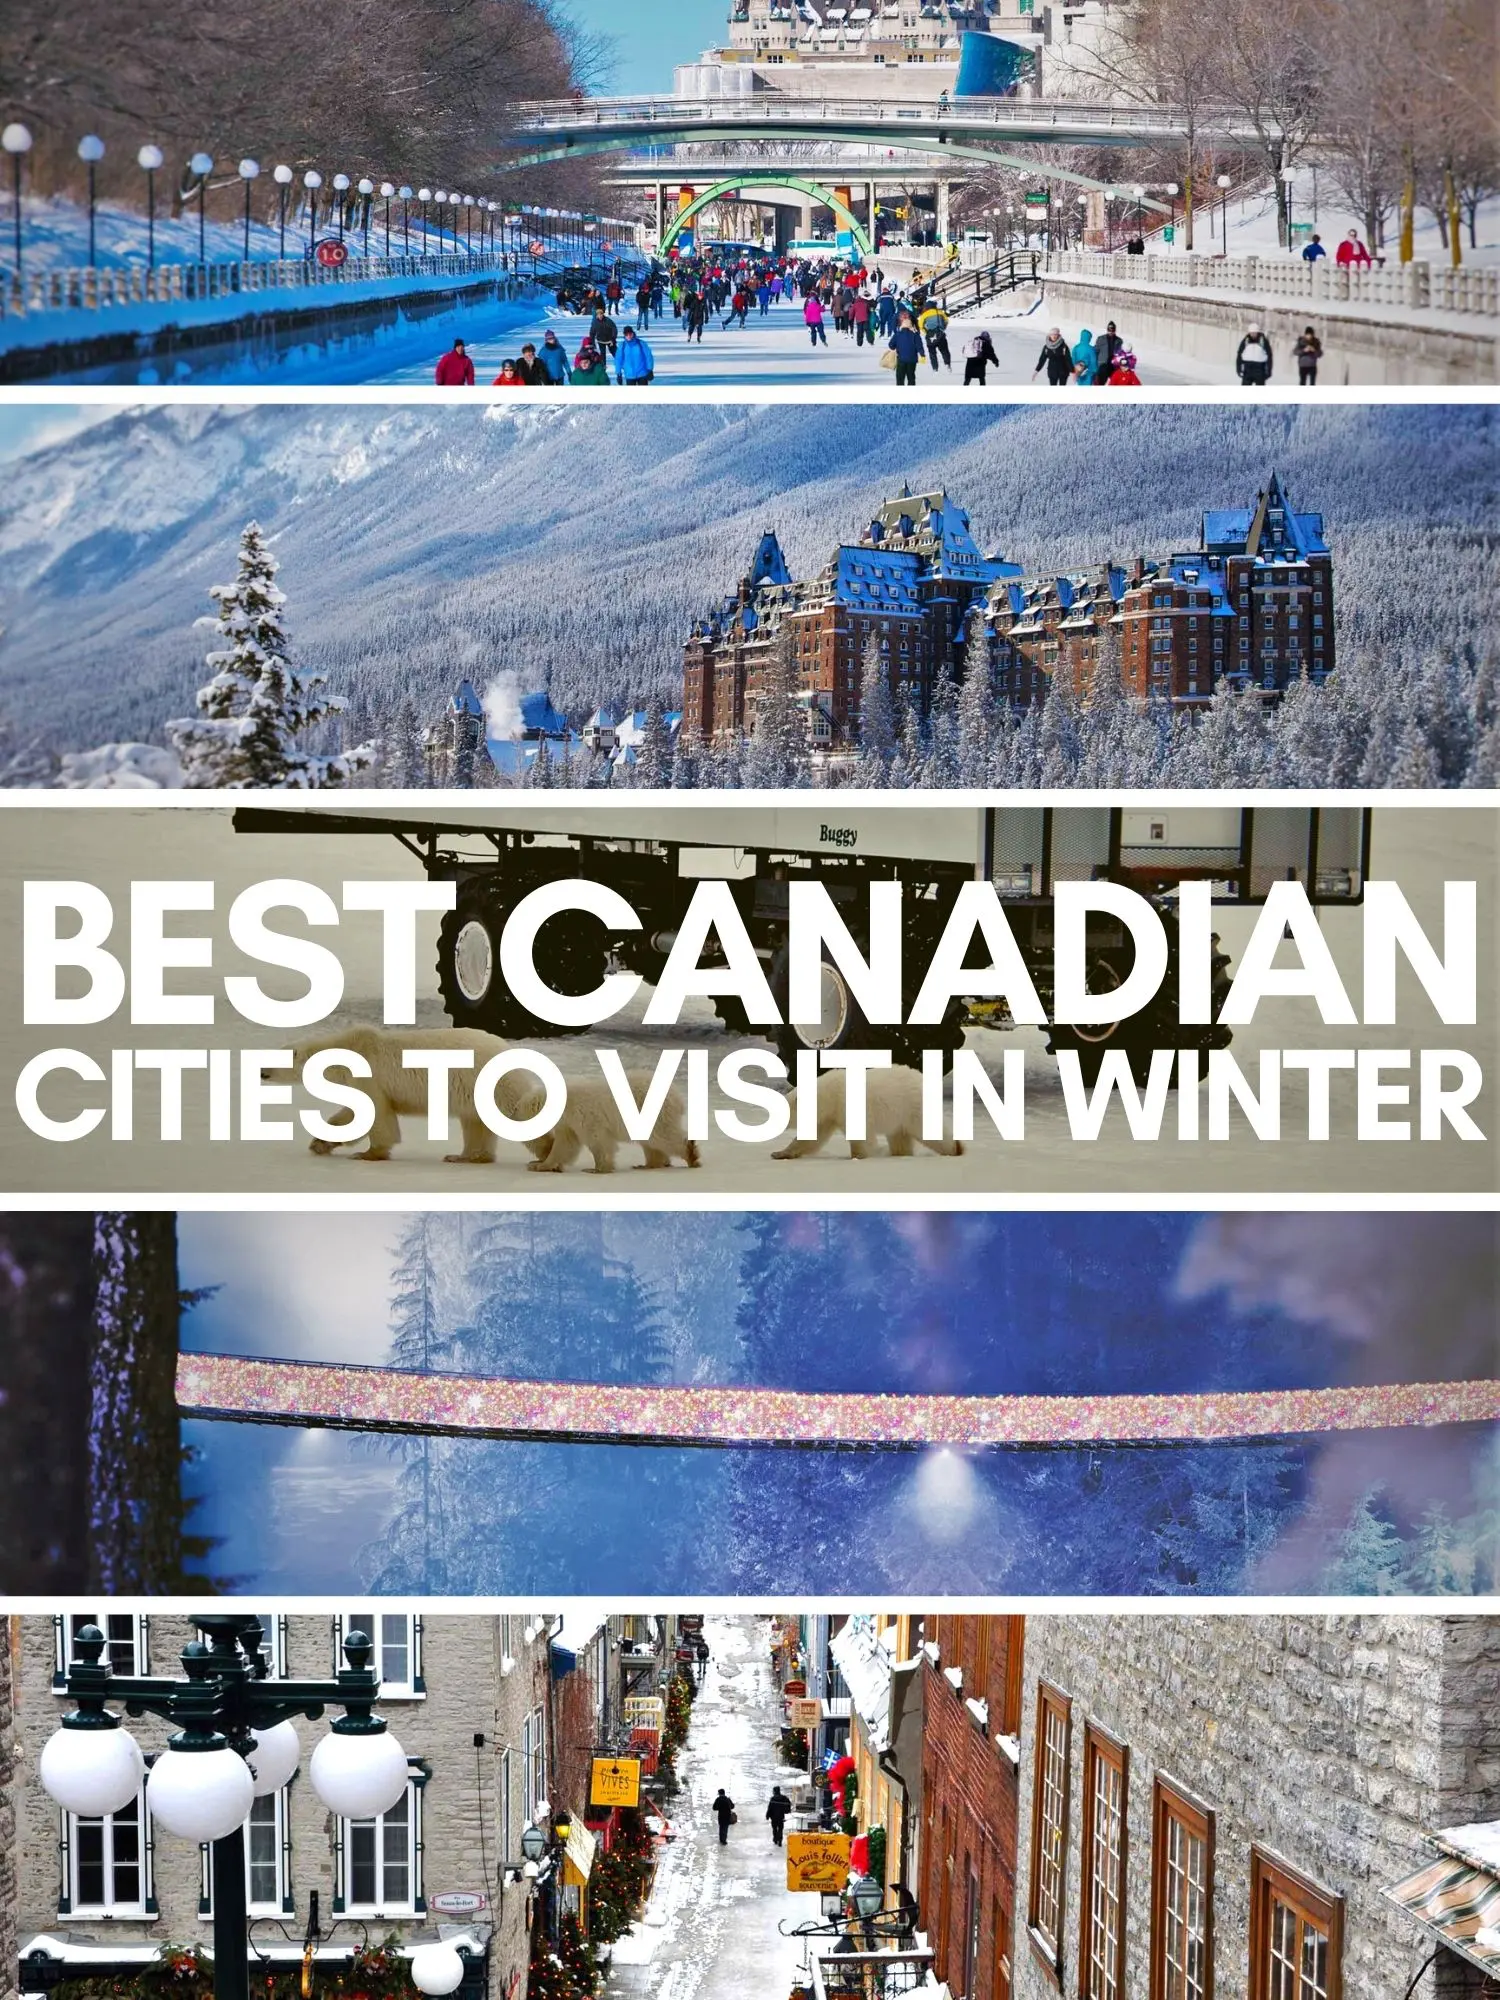 Canada may be cold in the winter, but these Canadian cities have unique things to do, ways to stay warm, and amazing hotels in the snow. Perfect Canadian adventures!